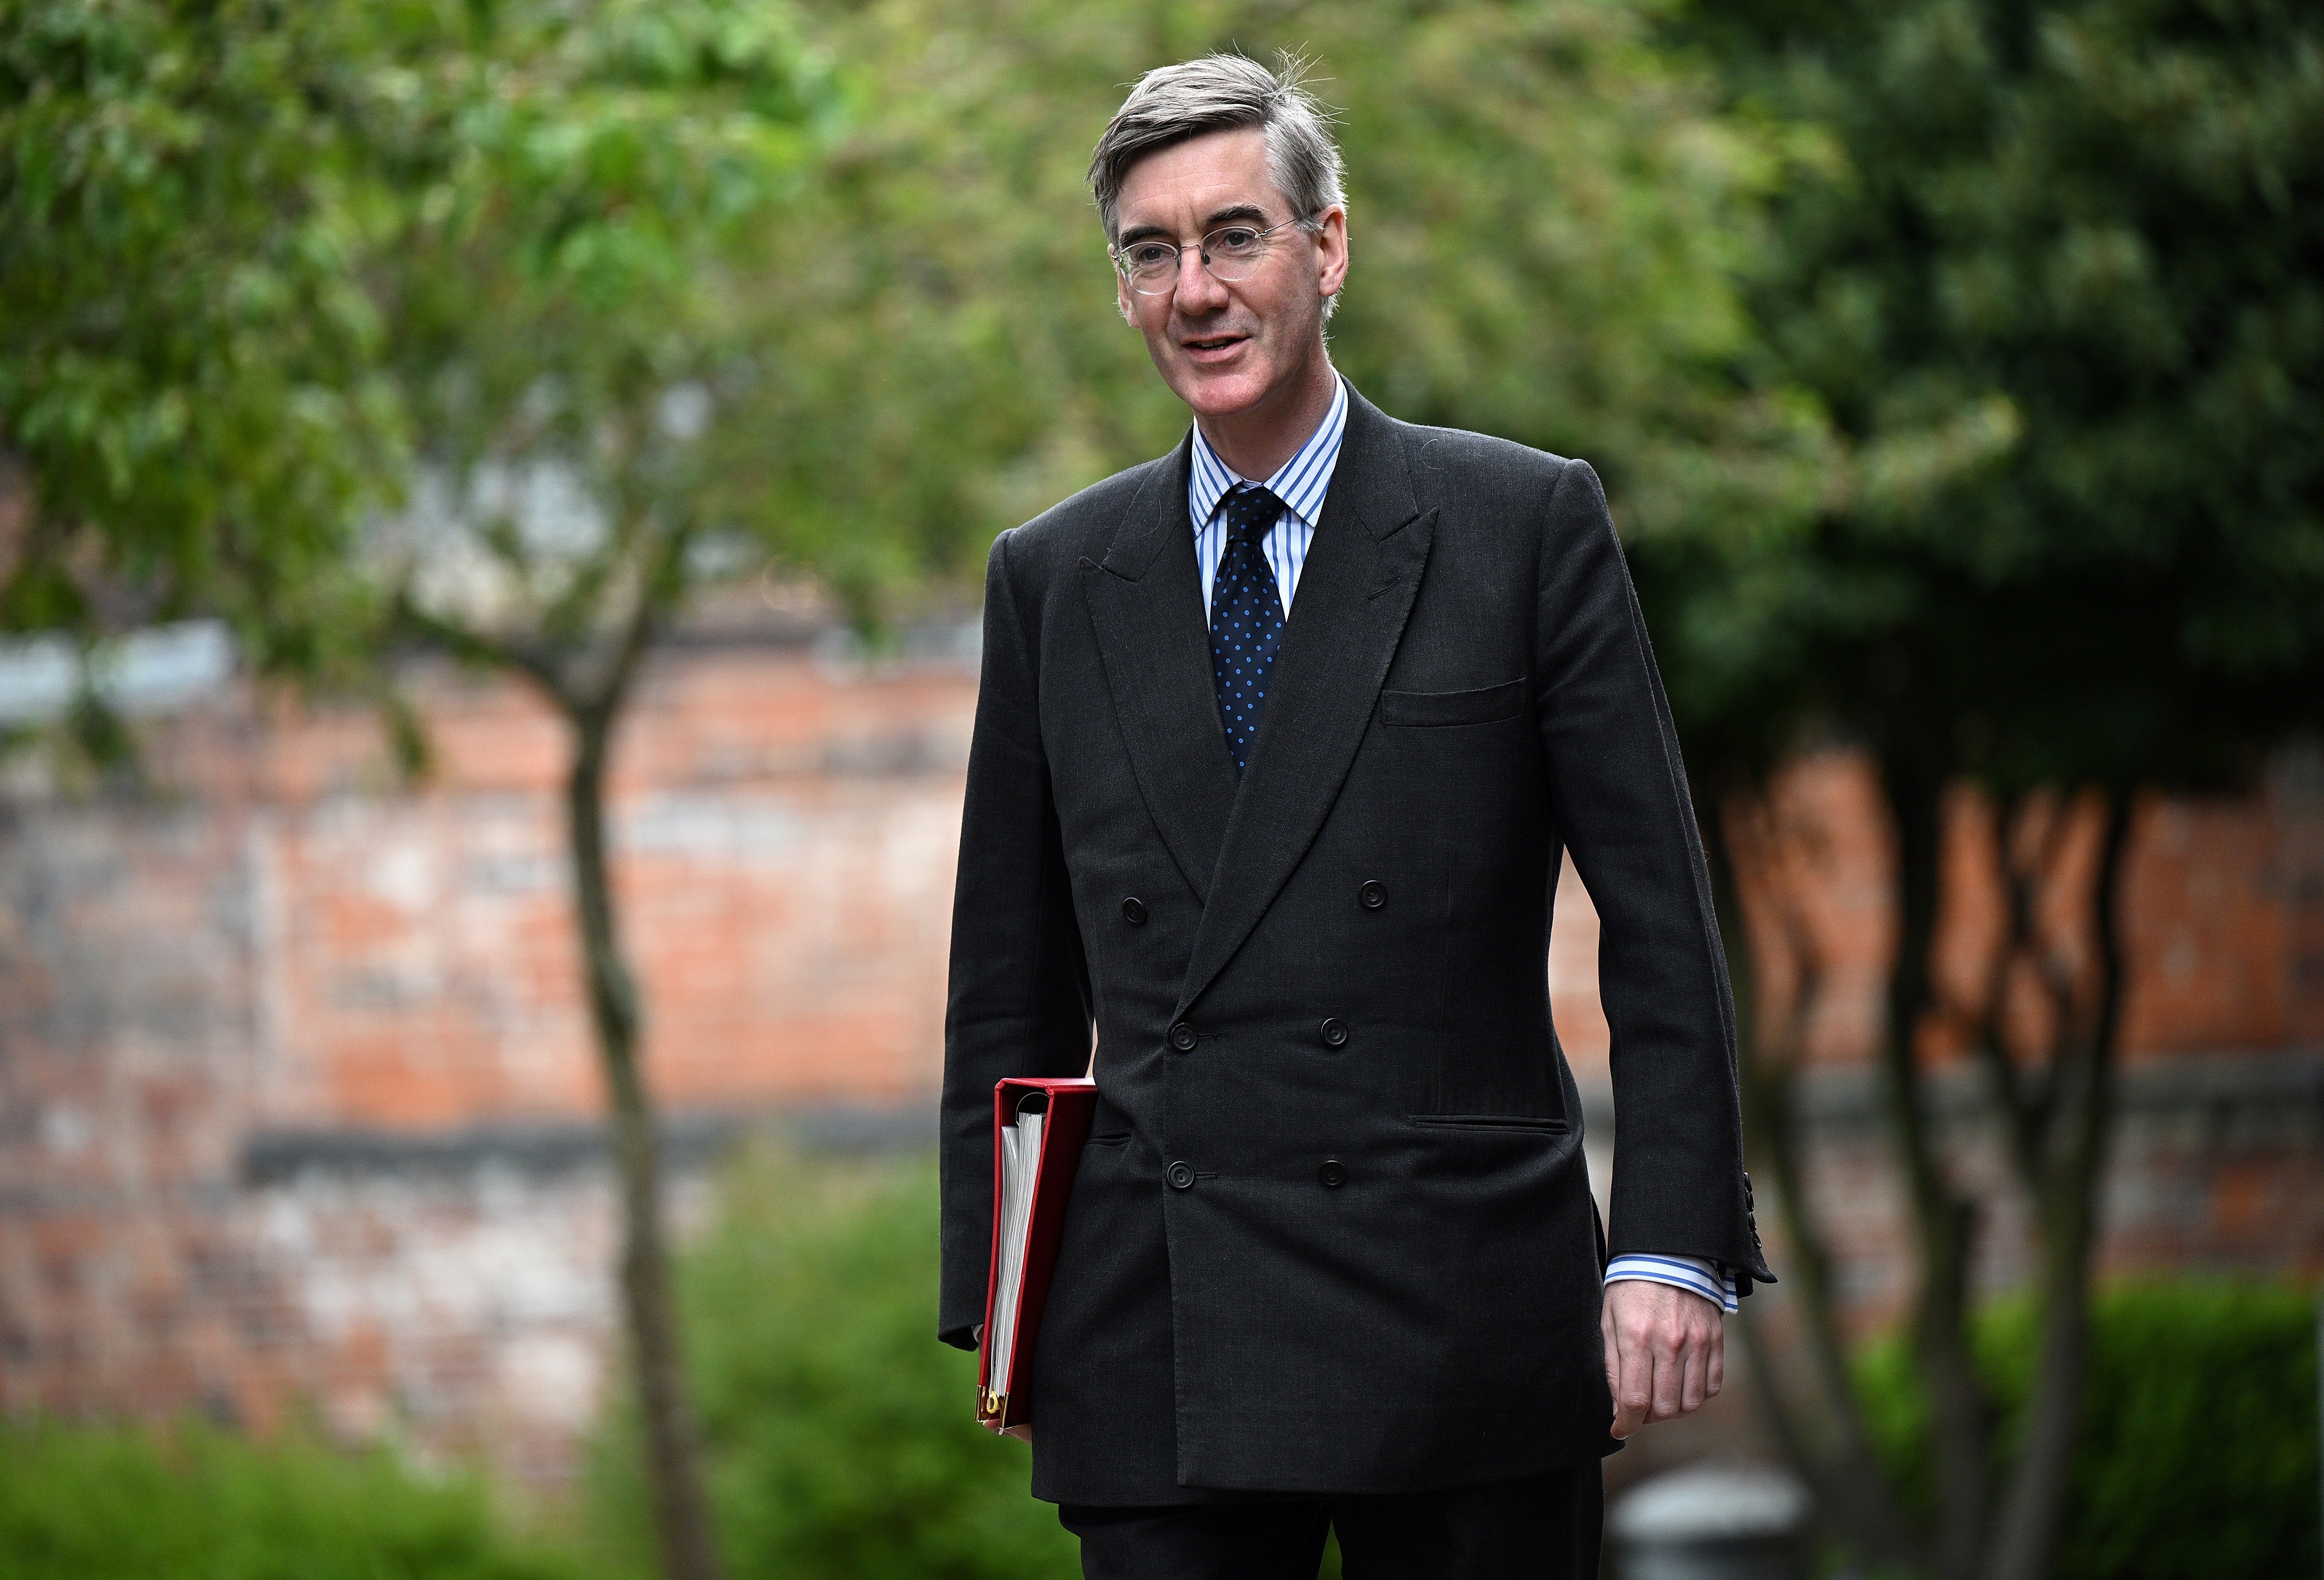 Jacob Rees-Mogg has been leaving notes on staff desk to pressure them to stop working from home